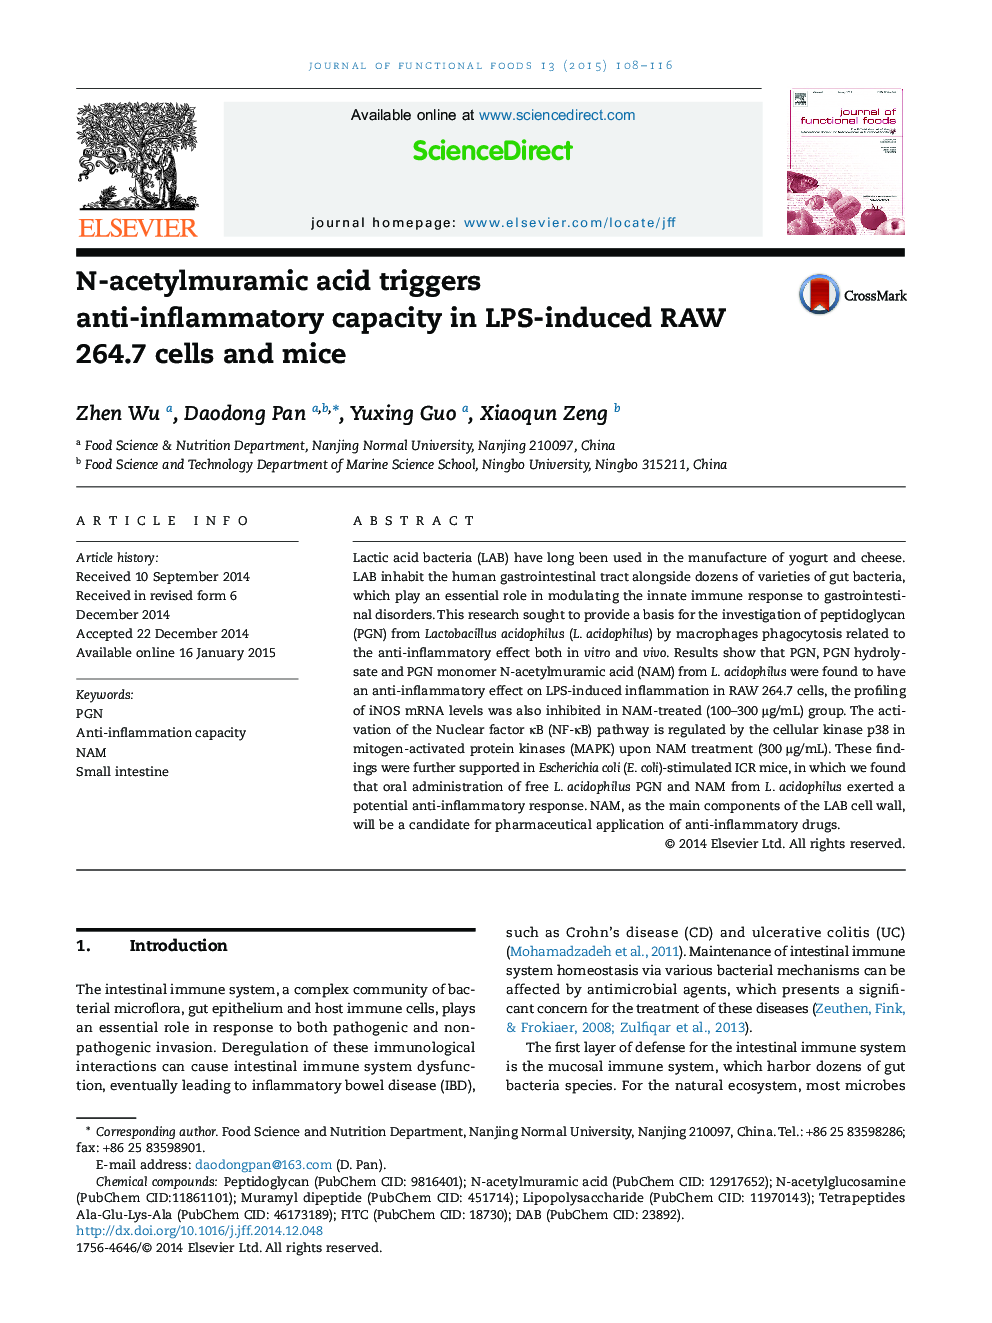 N-acetylmuramic acid triggers anti-inflammatory capacity in LPS-induced RAW 264.7 cells and mice